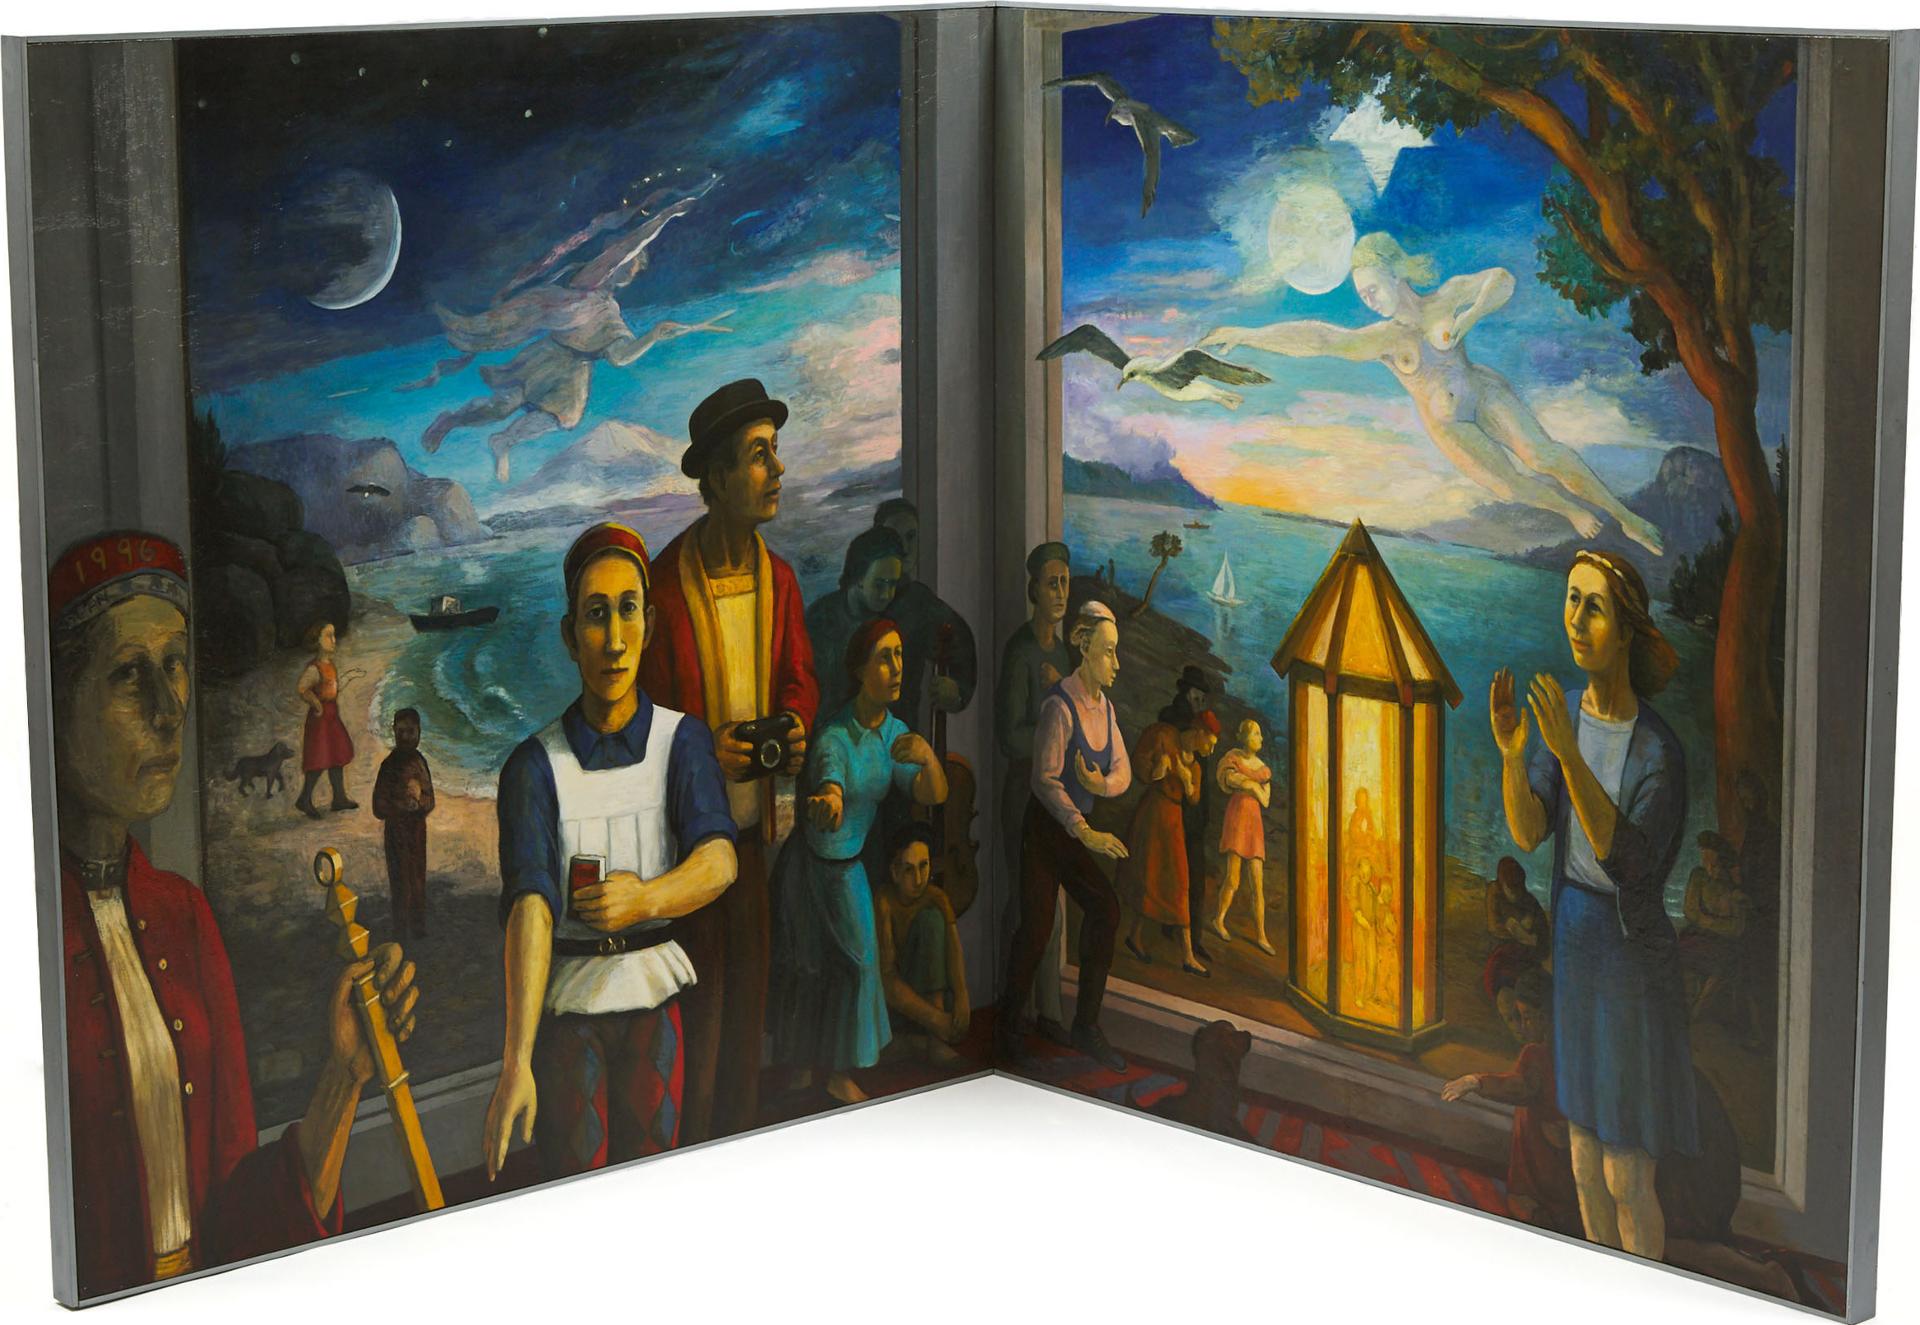 Diana Dean (1942) - The Seekers, 1996 (A Diptych)